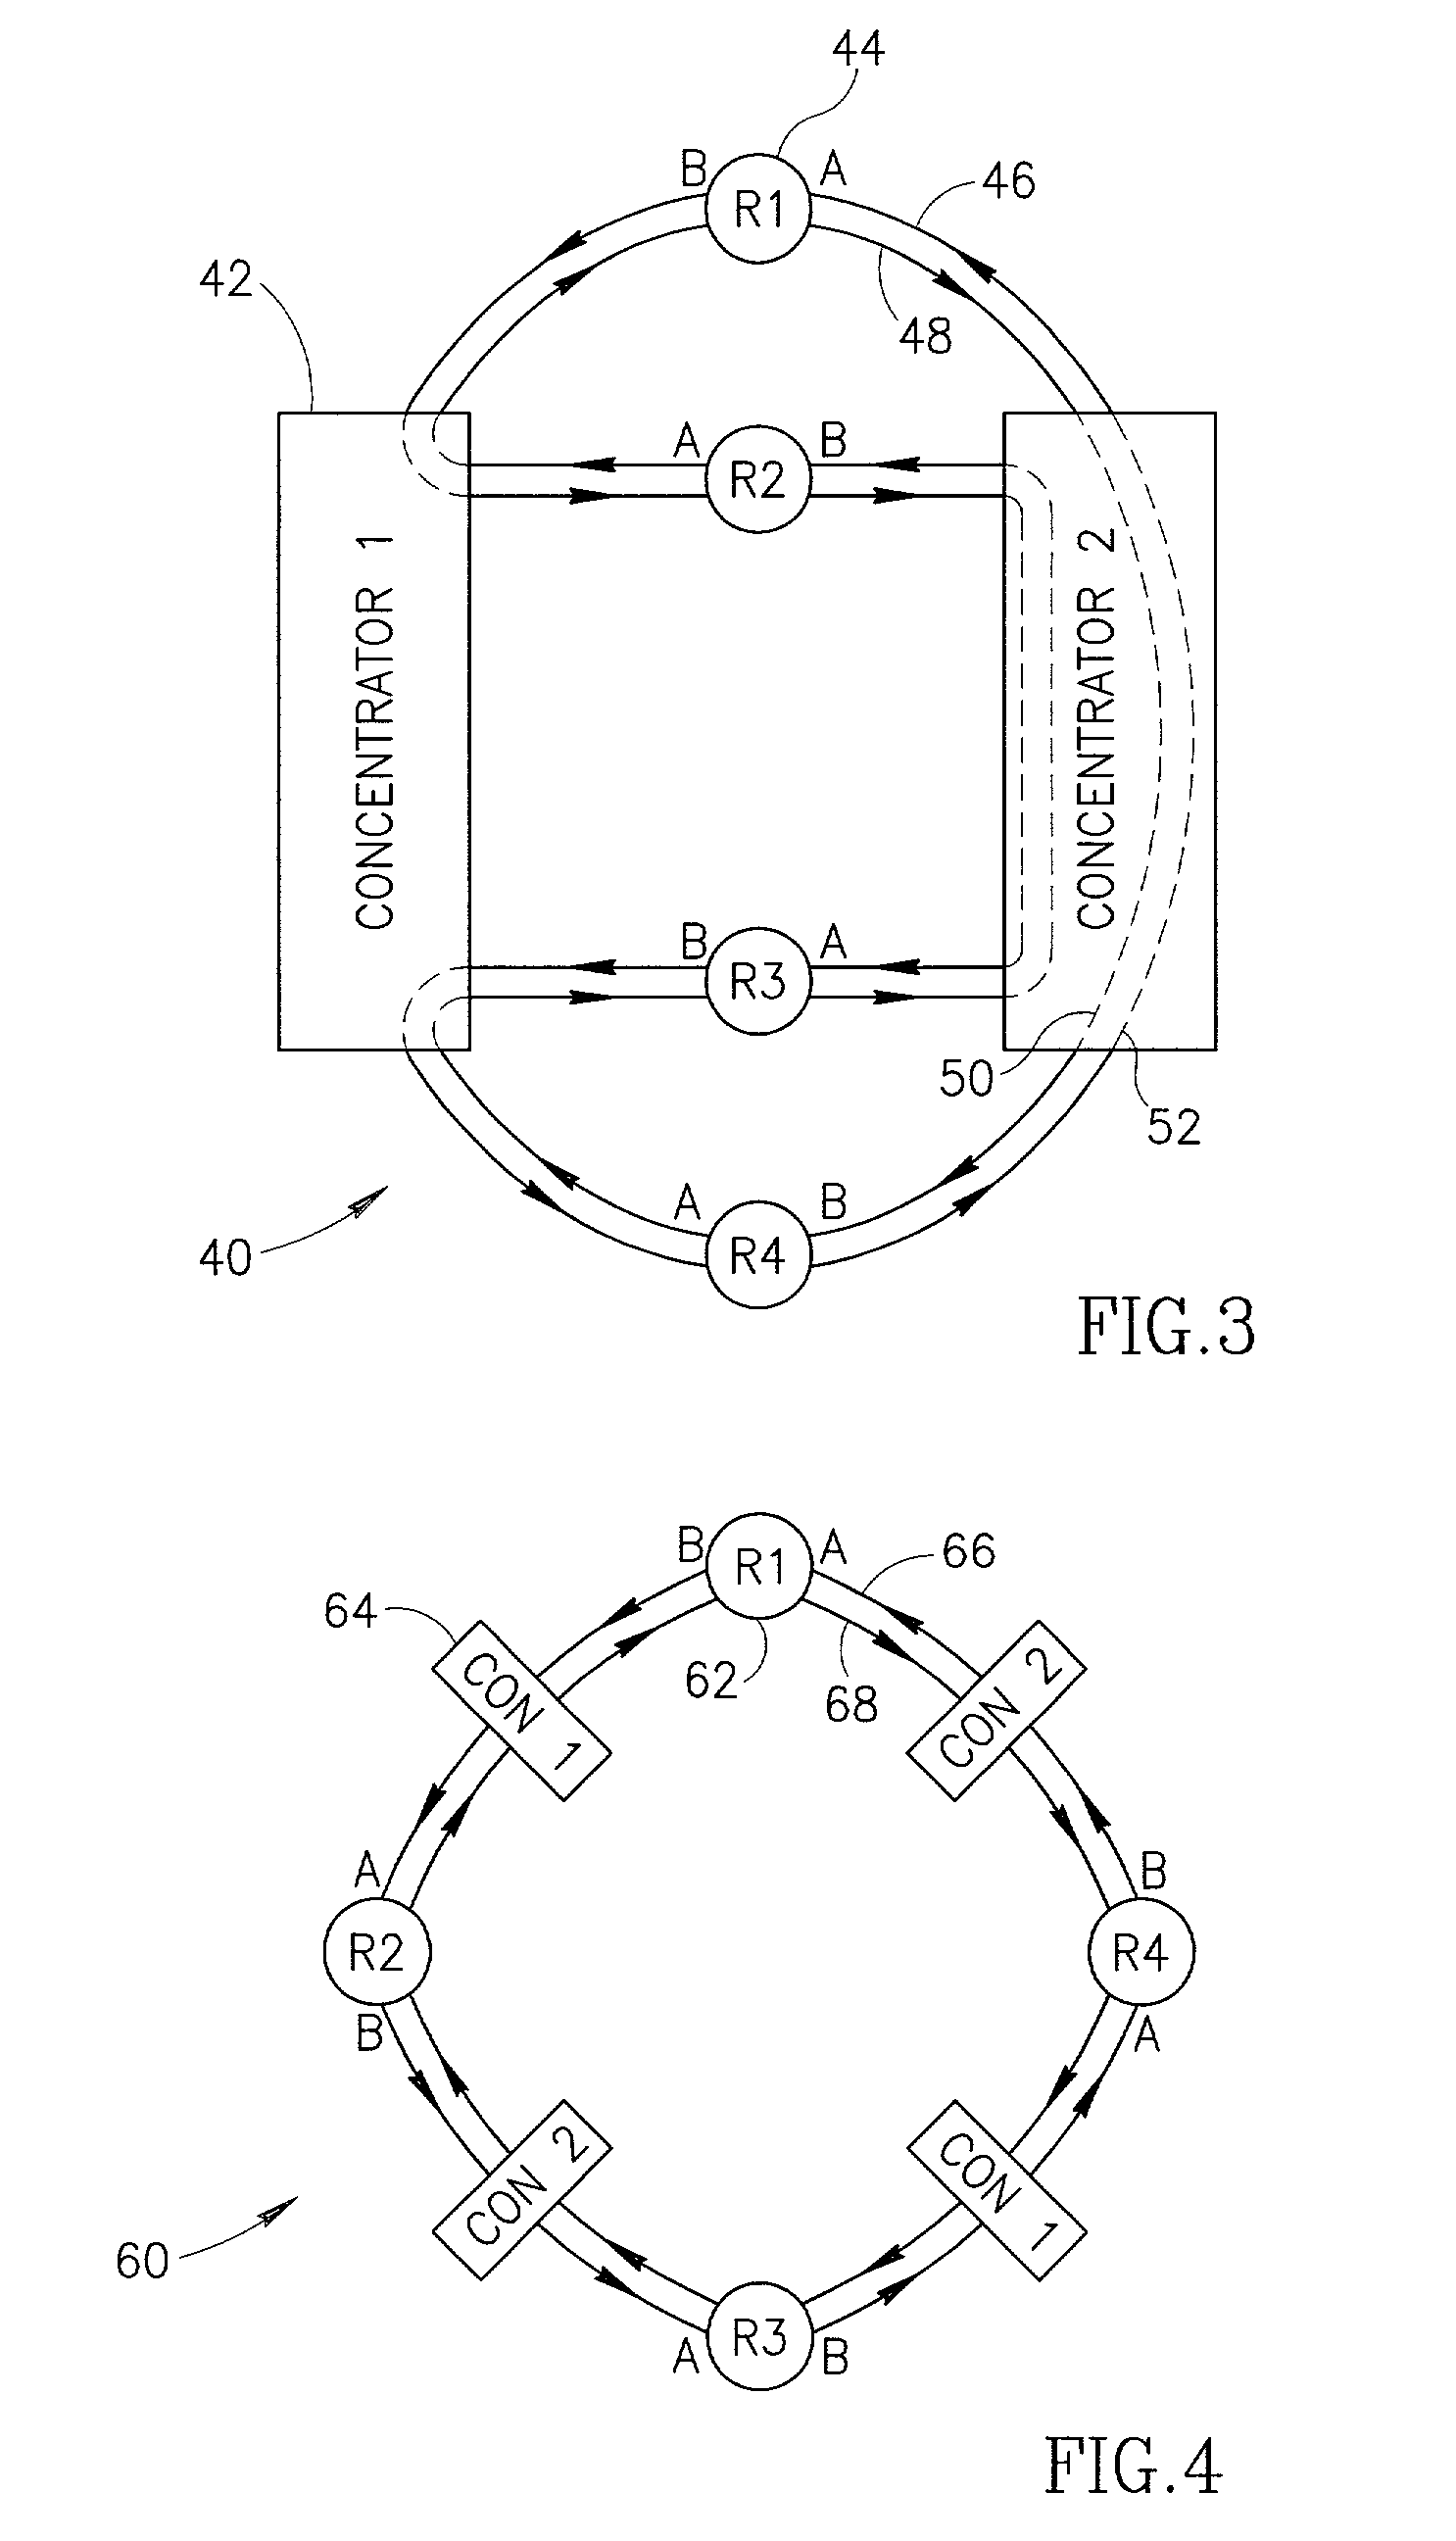 Redundancy for dual optical ring concentrator